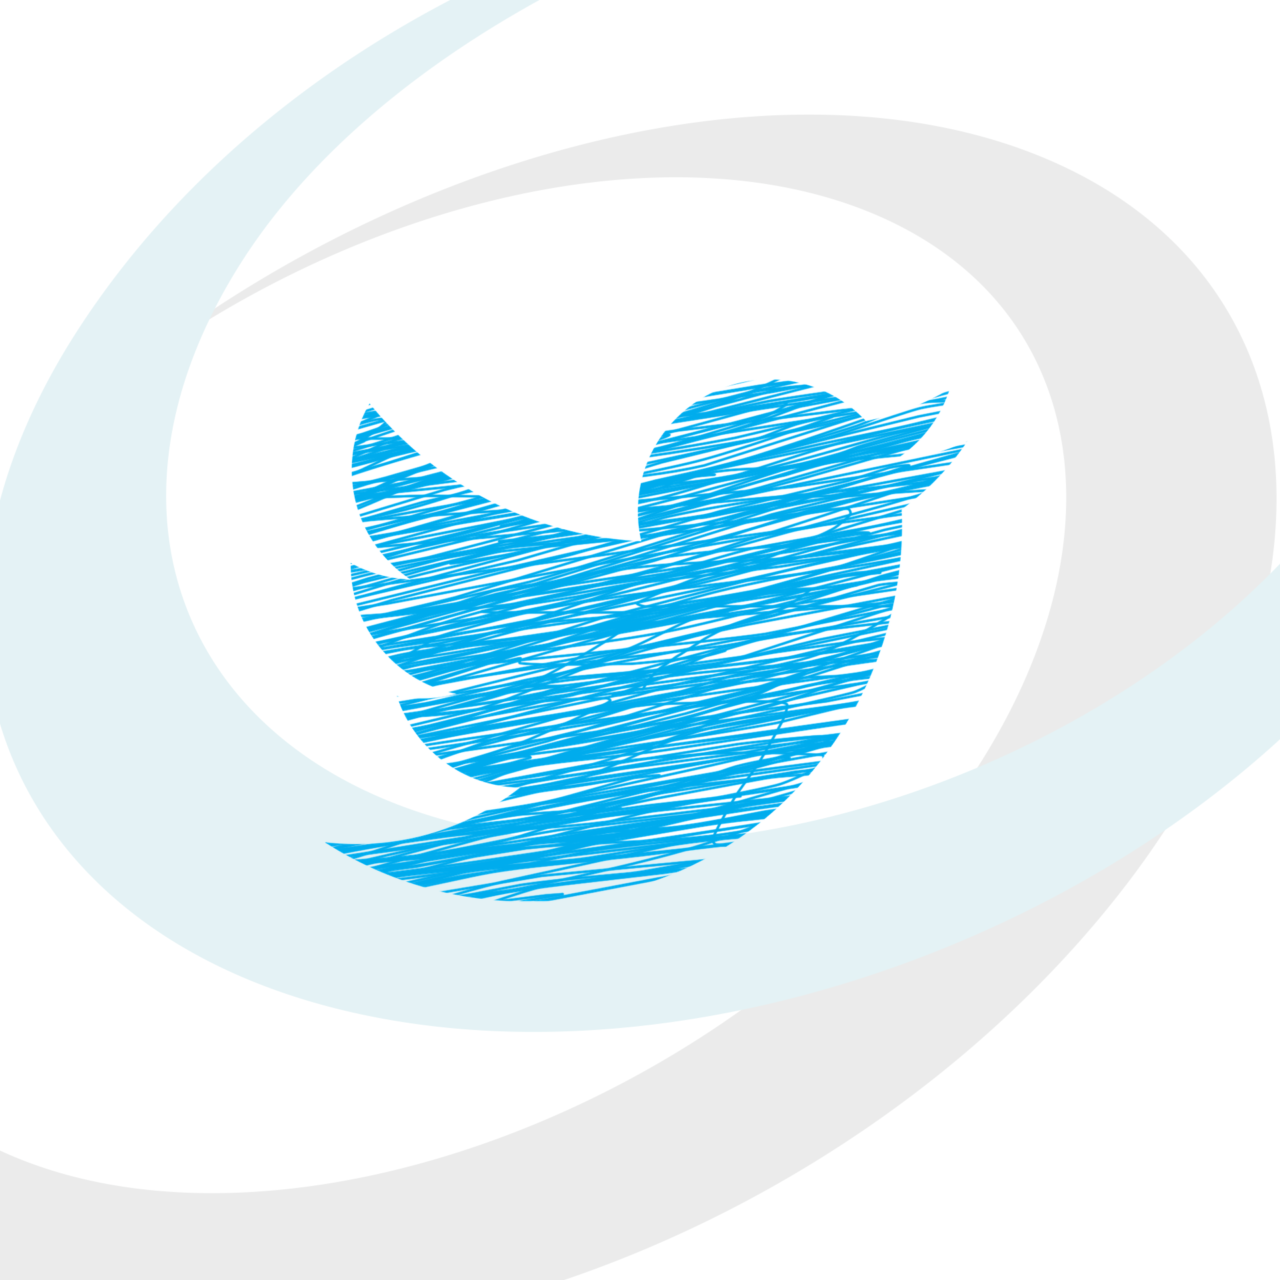 Twitter logo with the Commissioner's logo around it